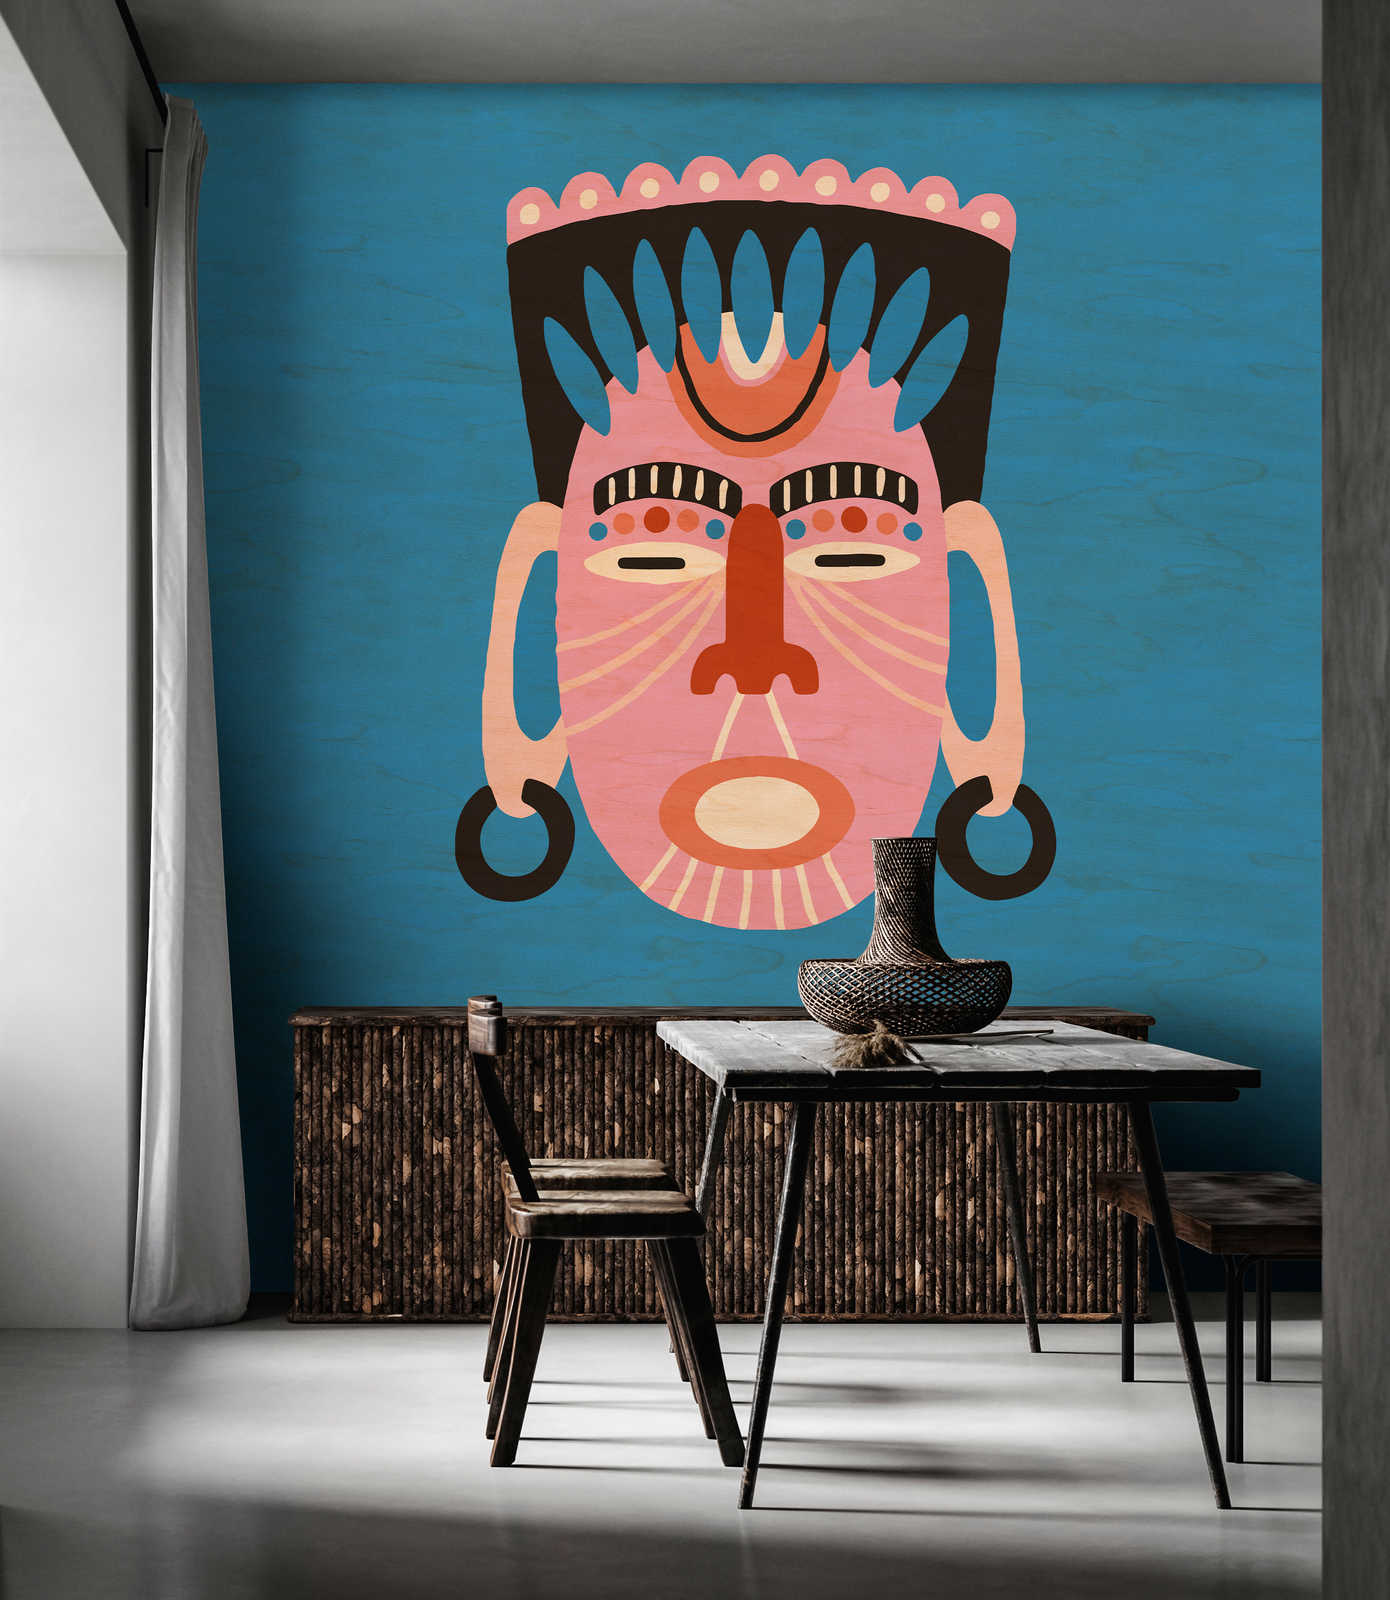             Overseas 3 - Blue mural ethnic design with mask
        